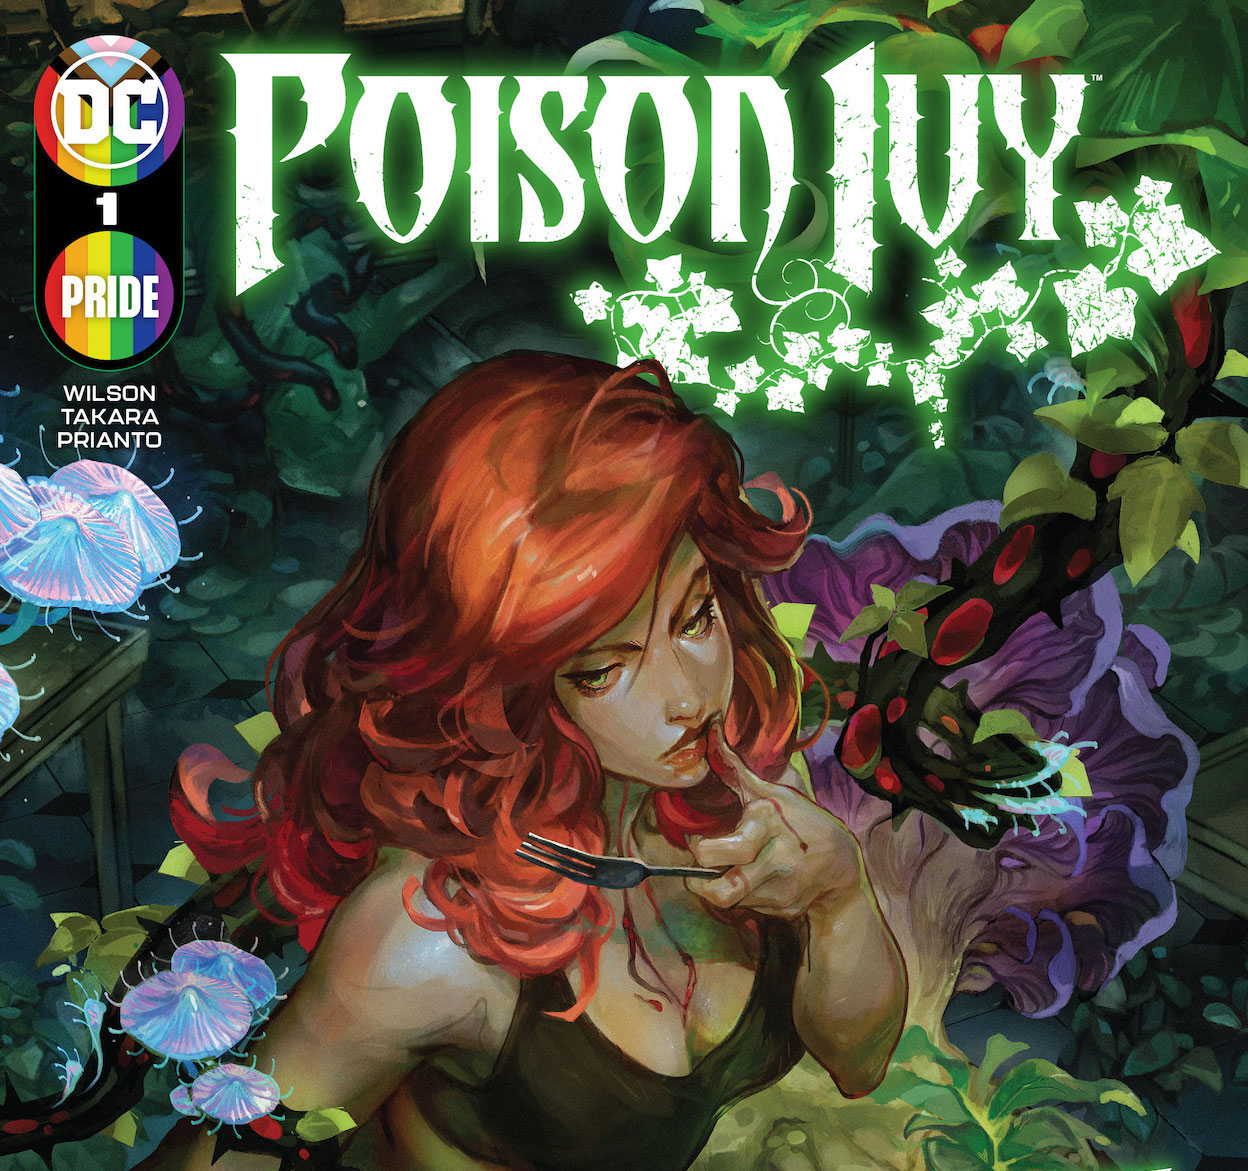 'Poison Ivy' #1 is a successful, character driven story